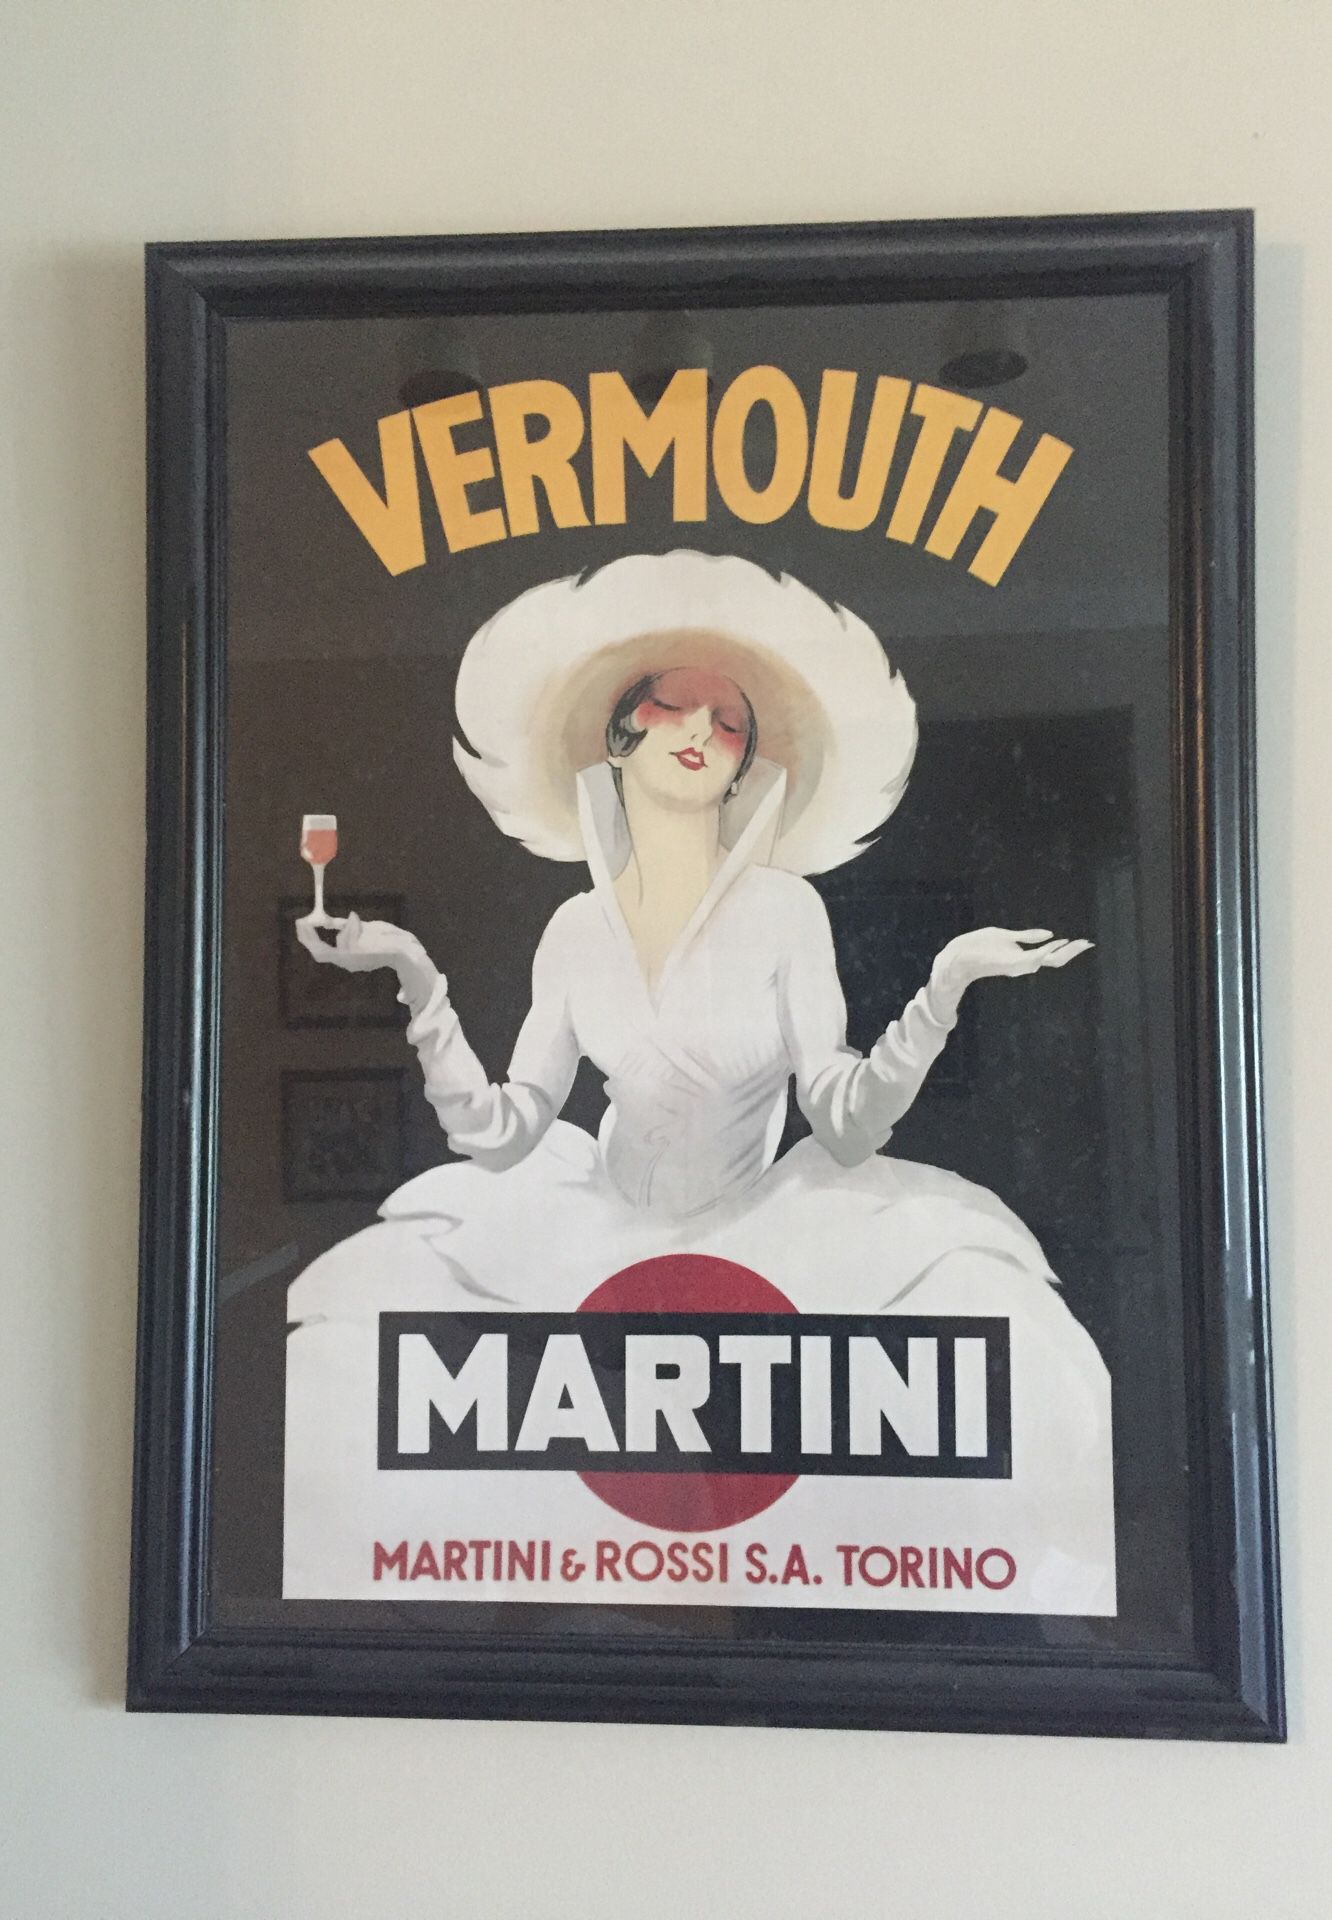 Martini and Rossi framed poster